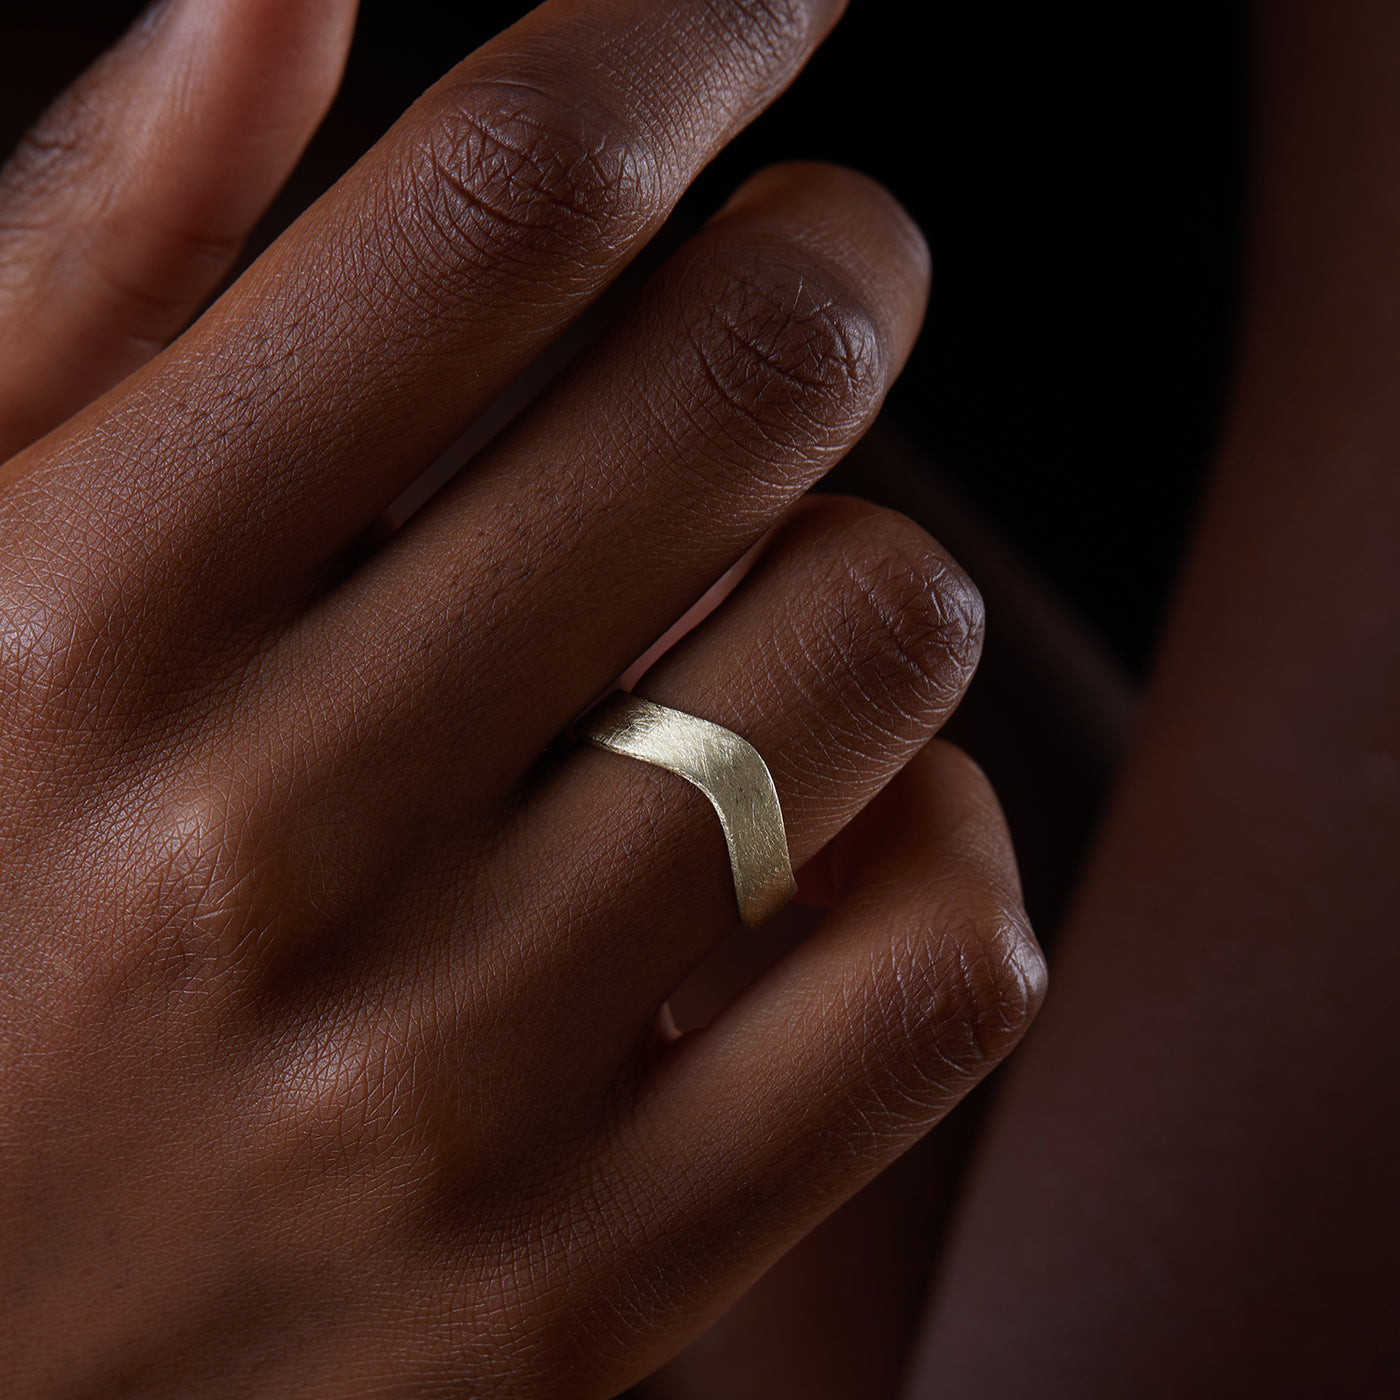 Waves | Gold Ring